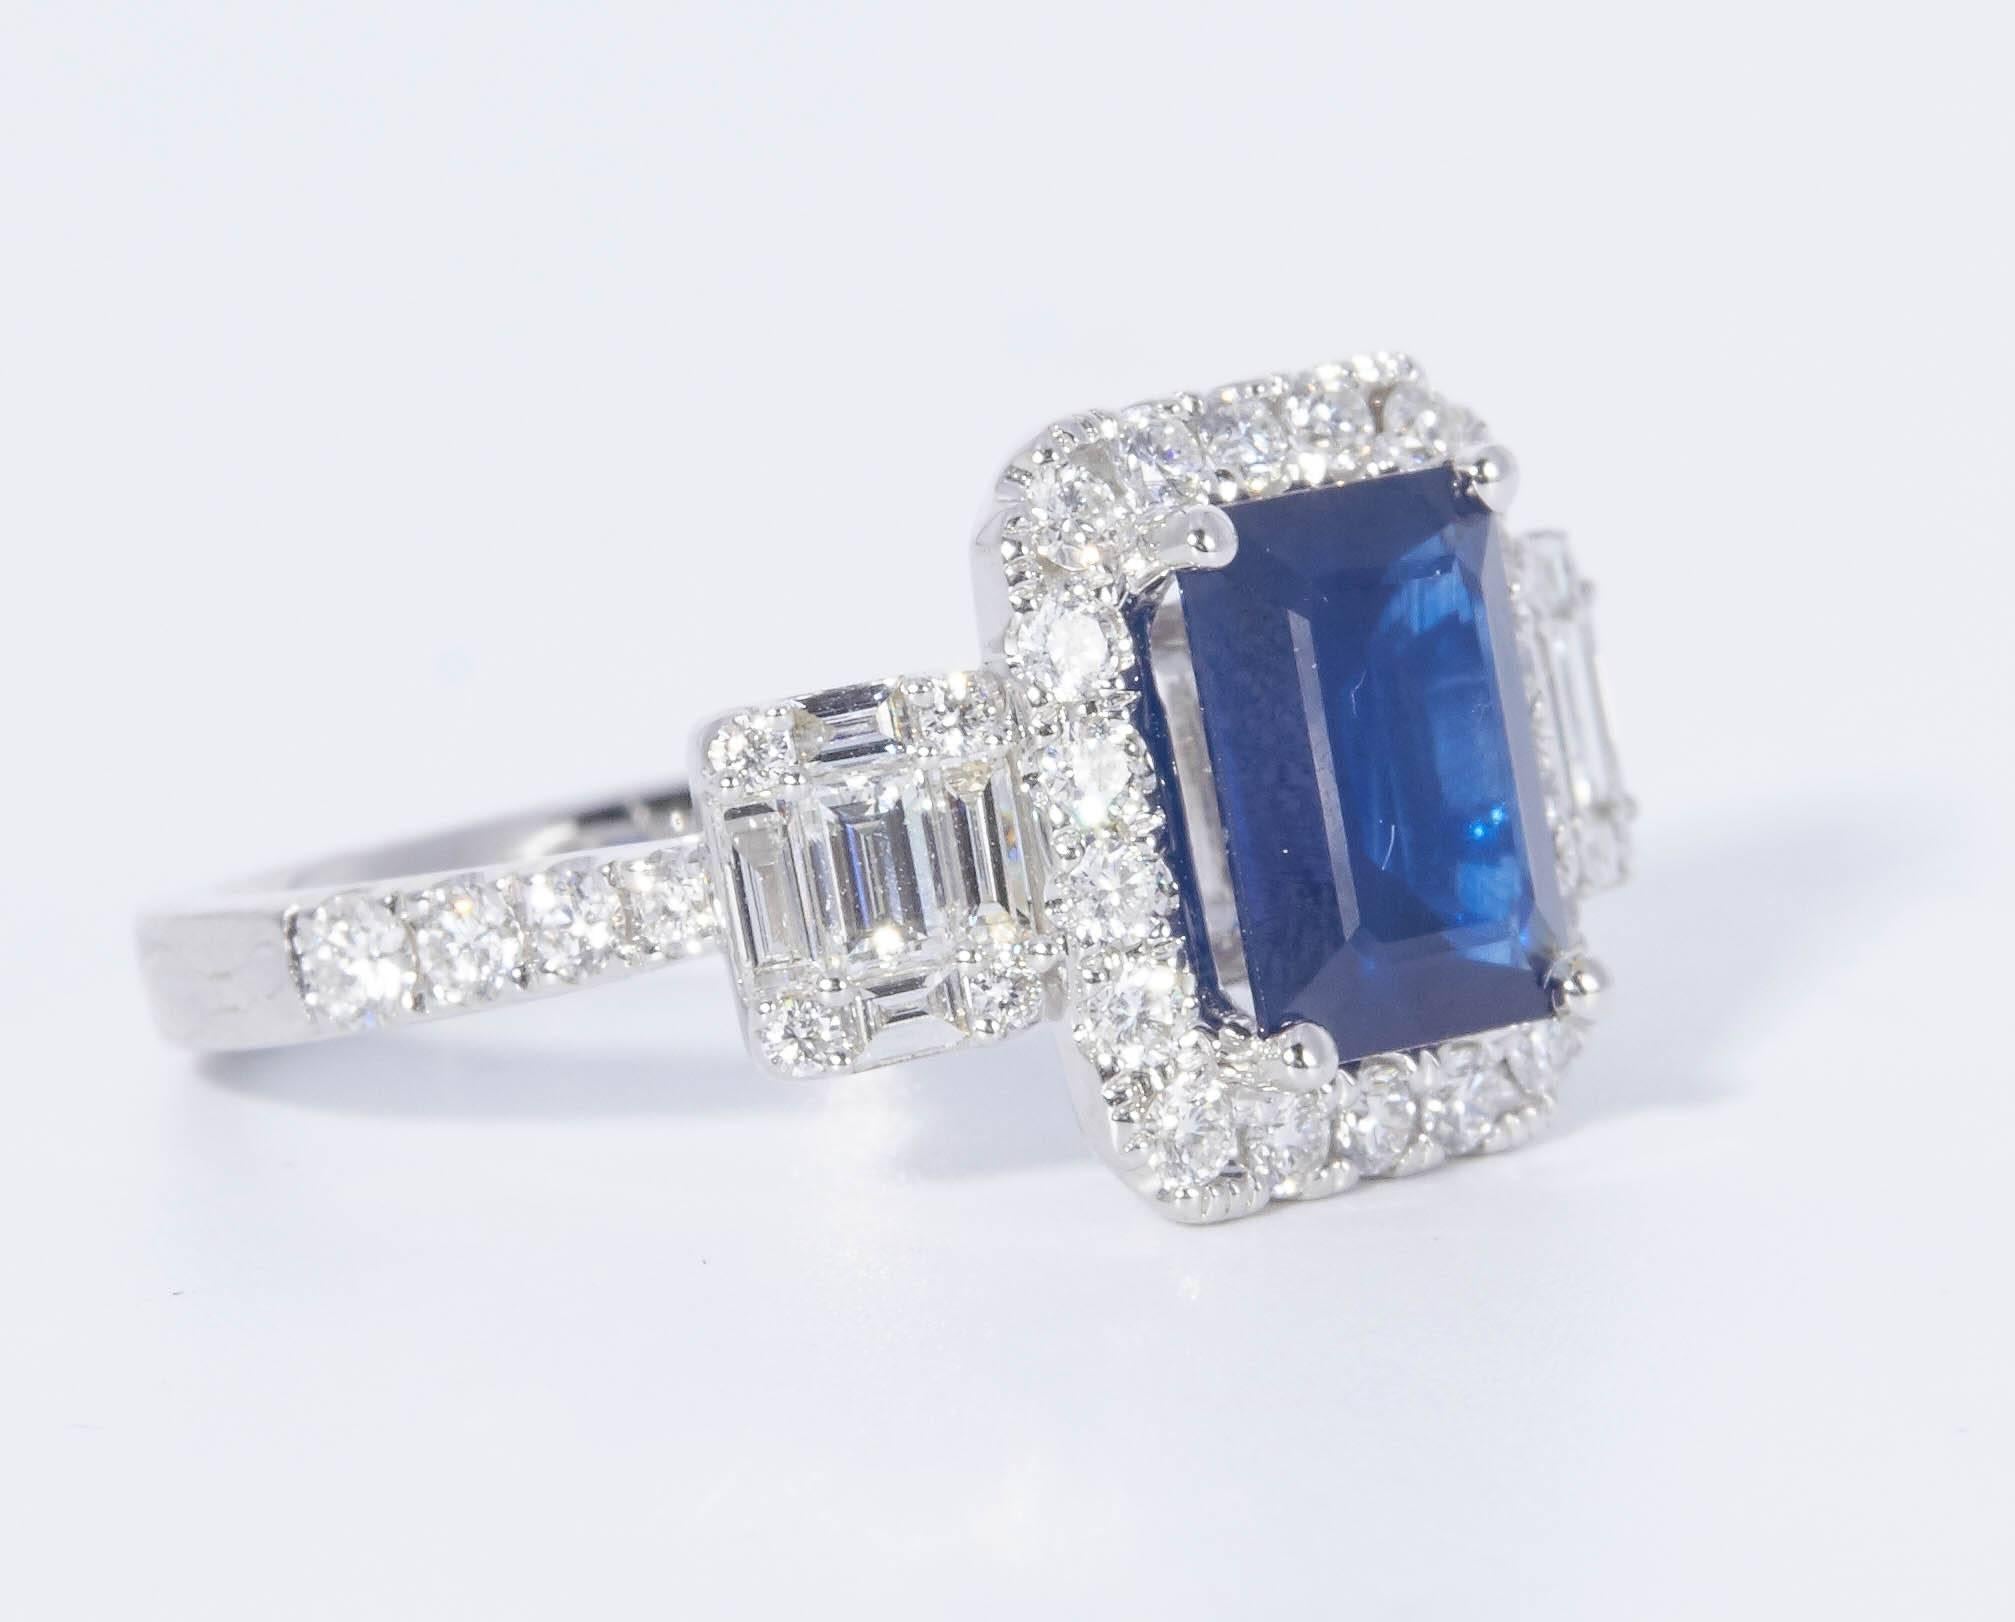 18k white gold
Sapphire : 2.28 Cts.
Diamonds: 1.03 Carats
It comes with a retail appraisal.
All our gemstone are genuine, and are sourced with the highest degree of integrity
